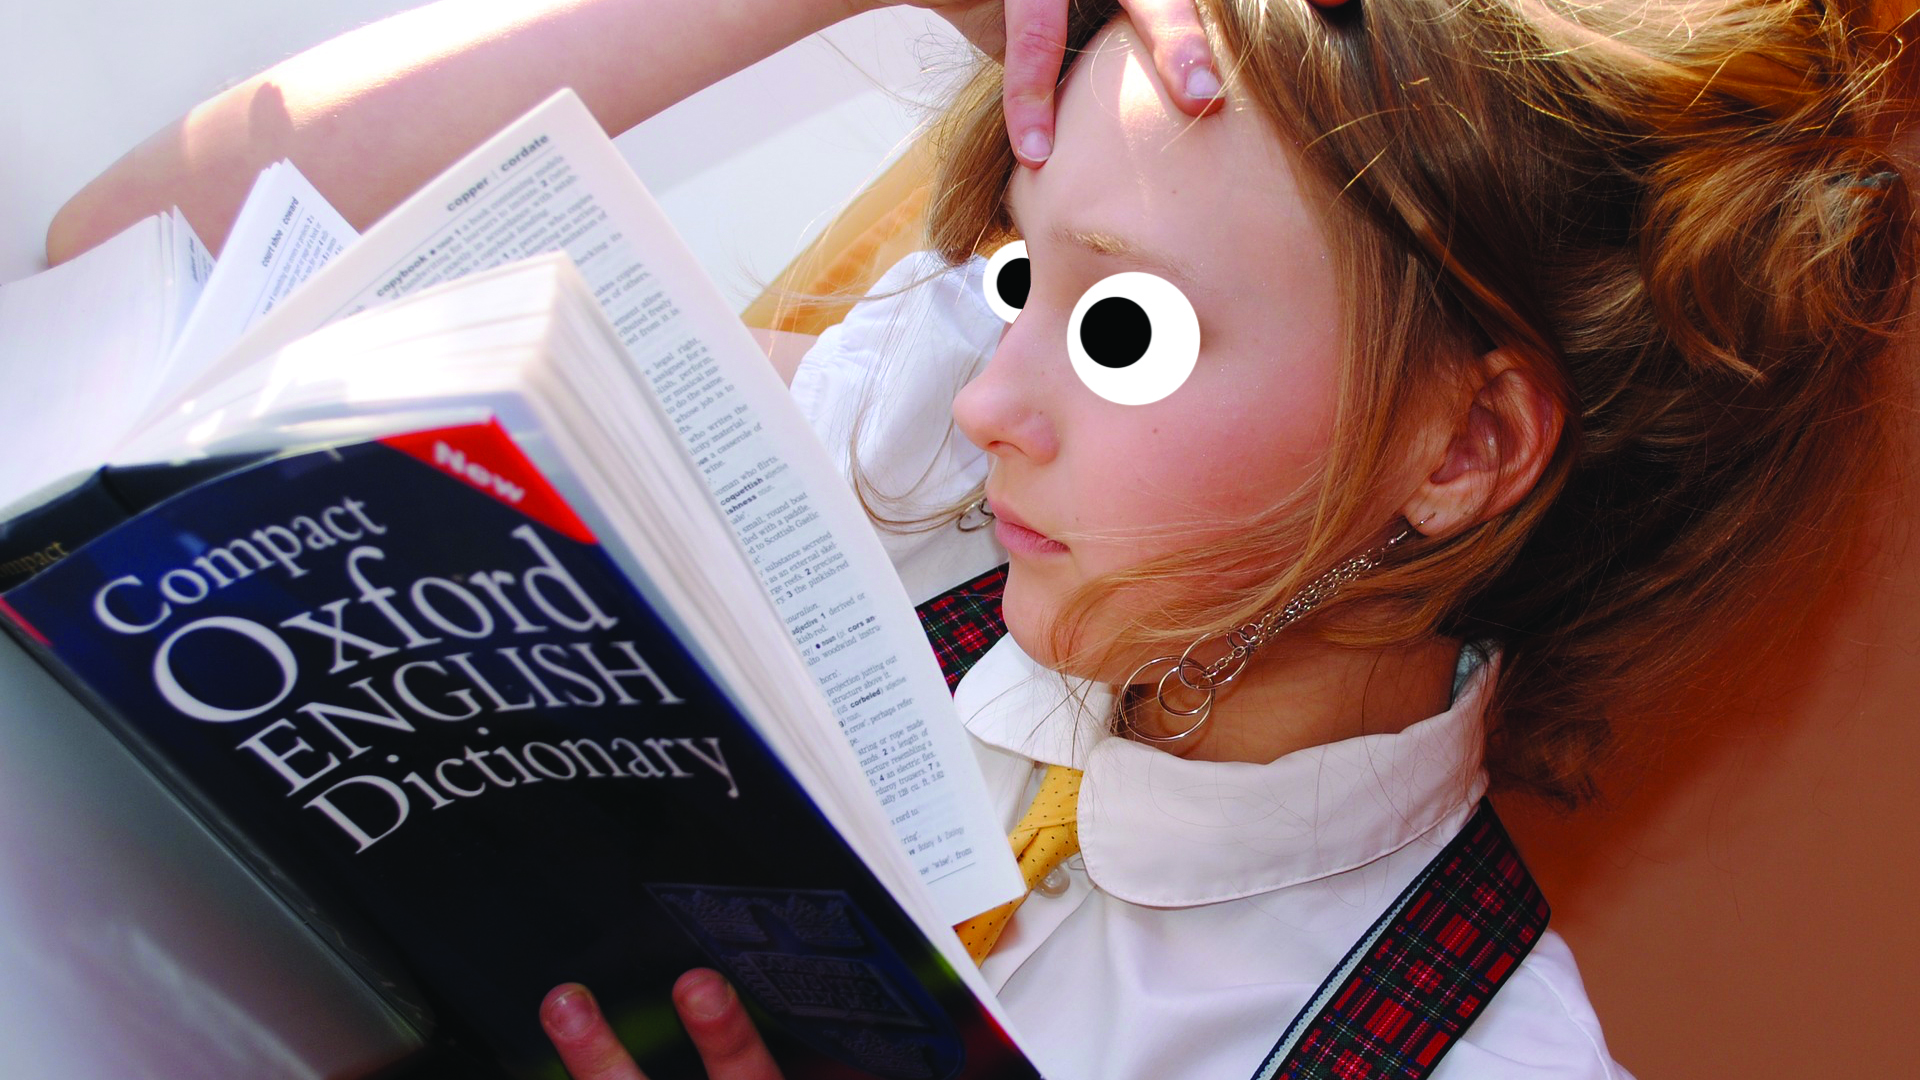 A girl reading the English dictionary